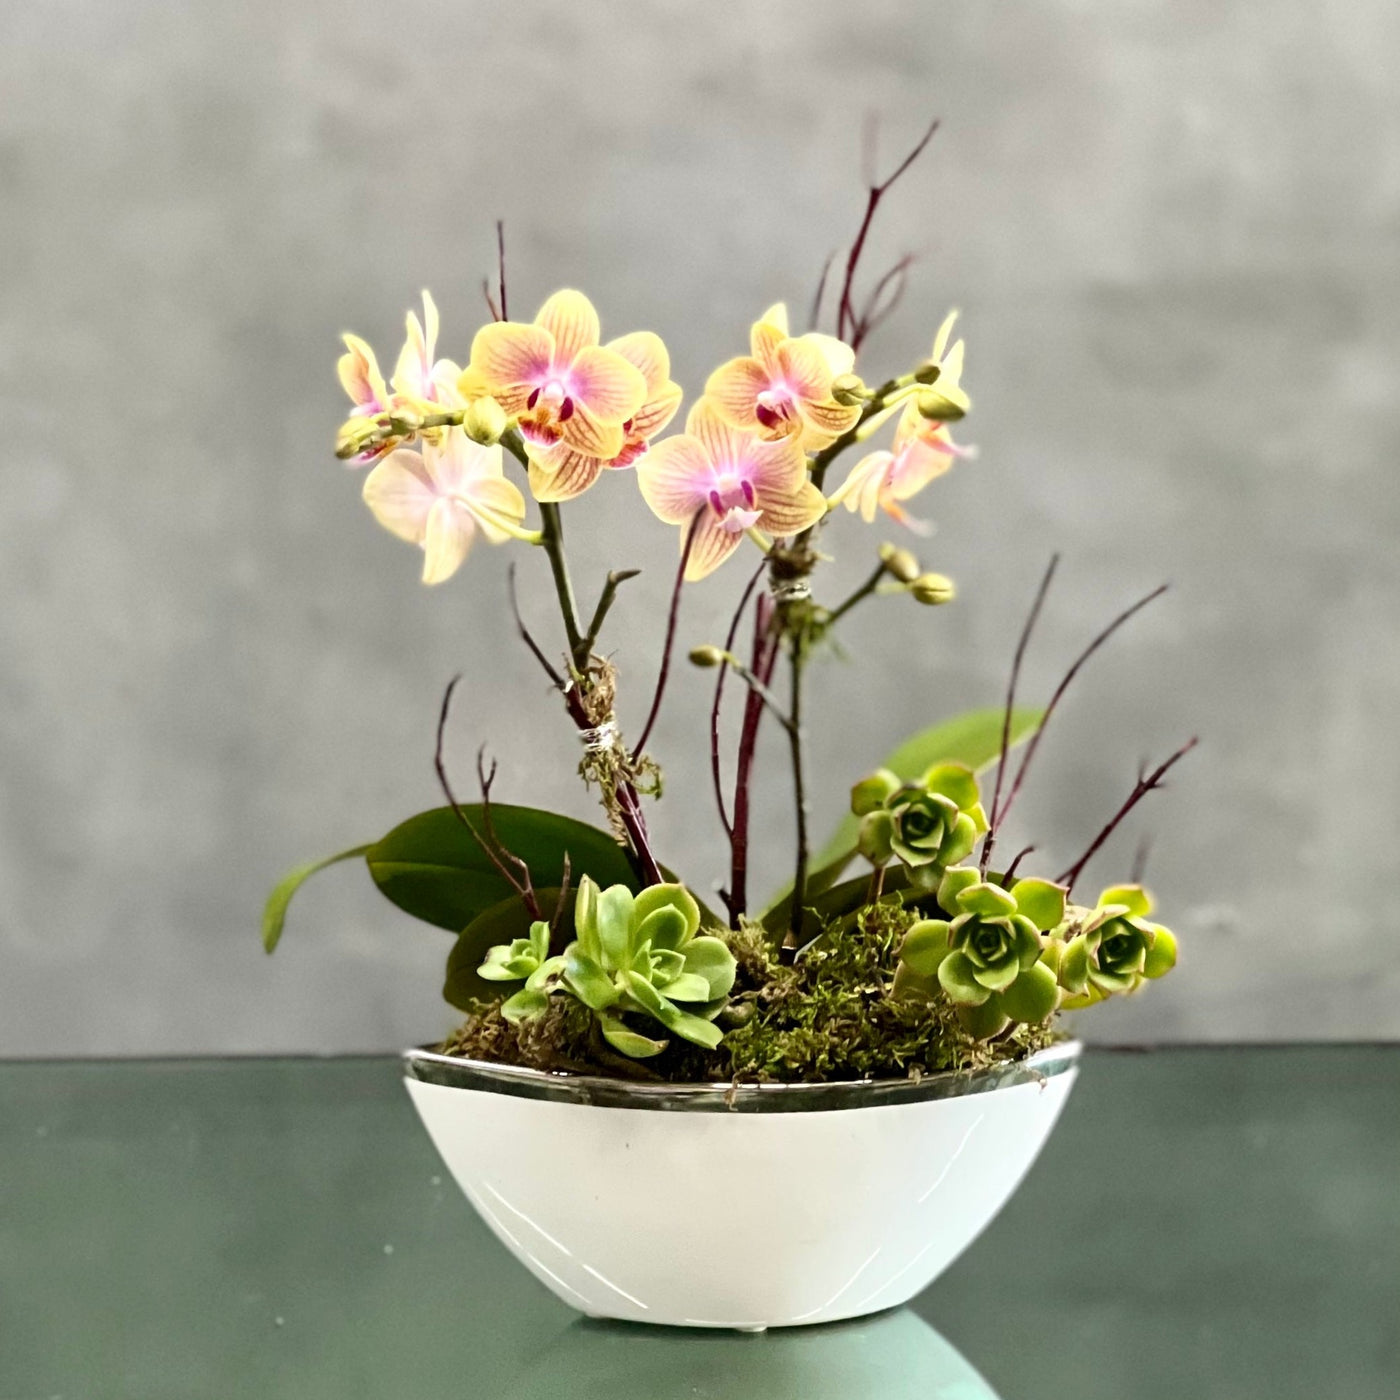 Beverly hills Florist presents Delicate double Mini yellow pink Orchid Plants accented with Succulent and Branches for same day delivery! This beautiful plant is then arranged in a modern Ceramic Container. Perfect for thank you, welcoming or just a simple and elegant touch! 